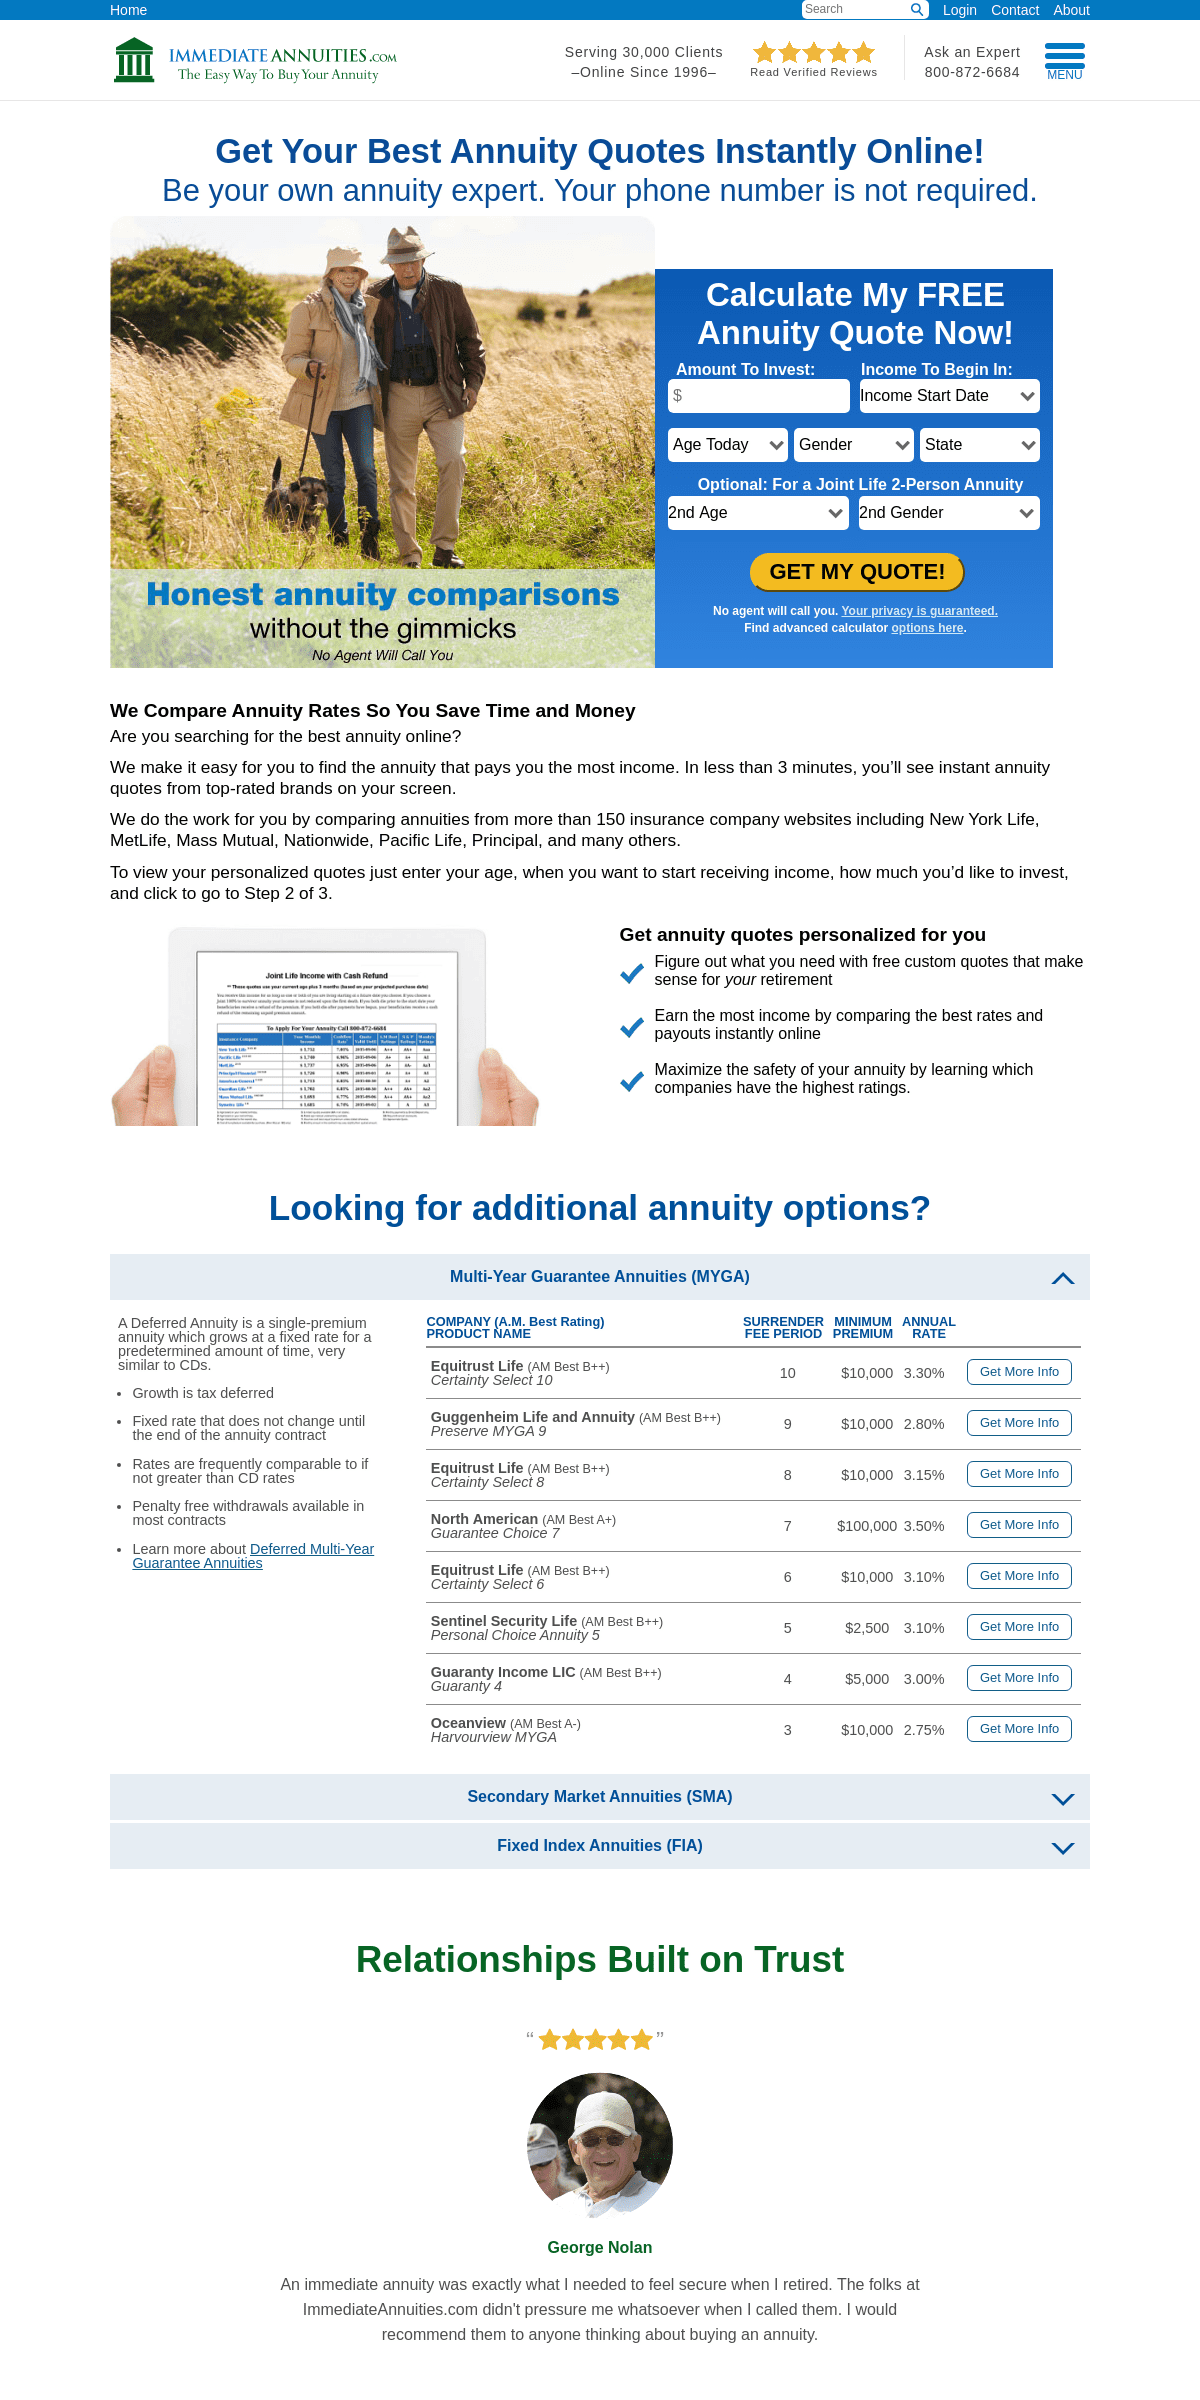 A complete backup of immediateannuities.com